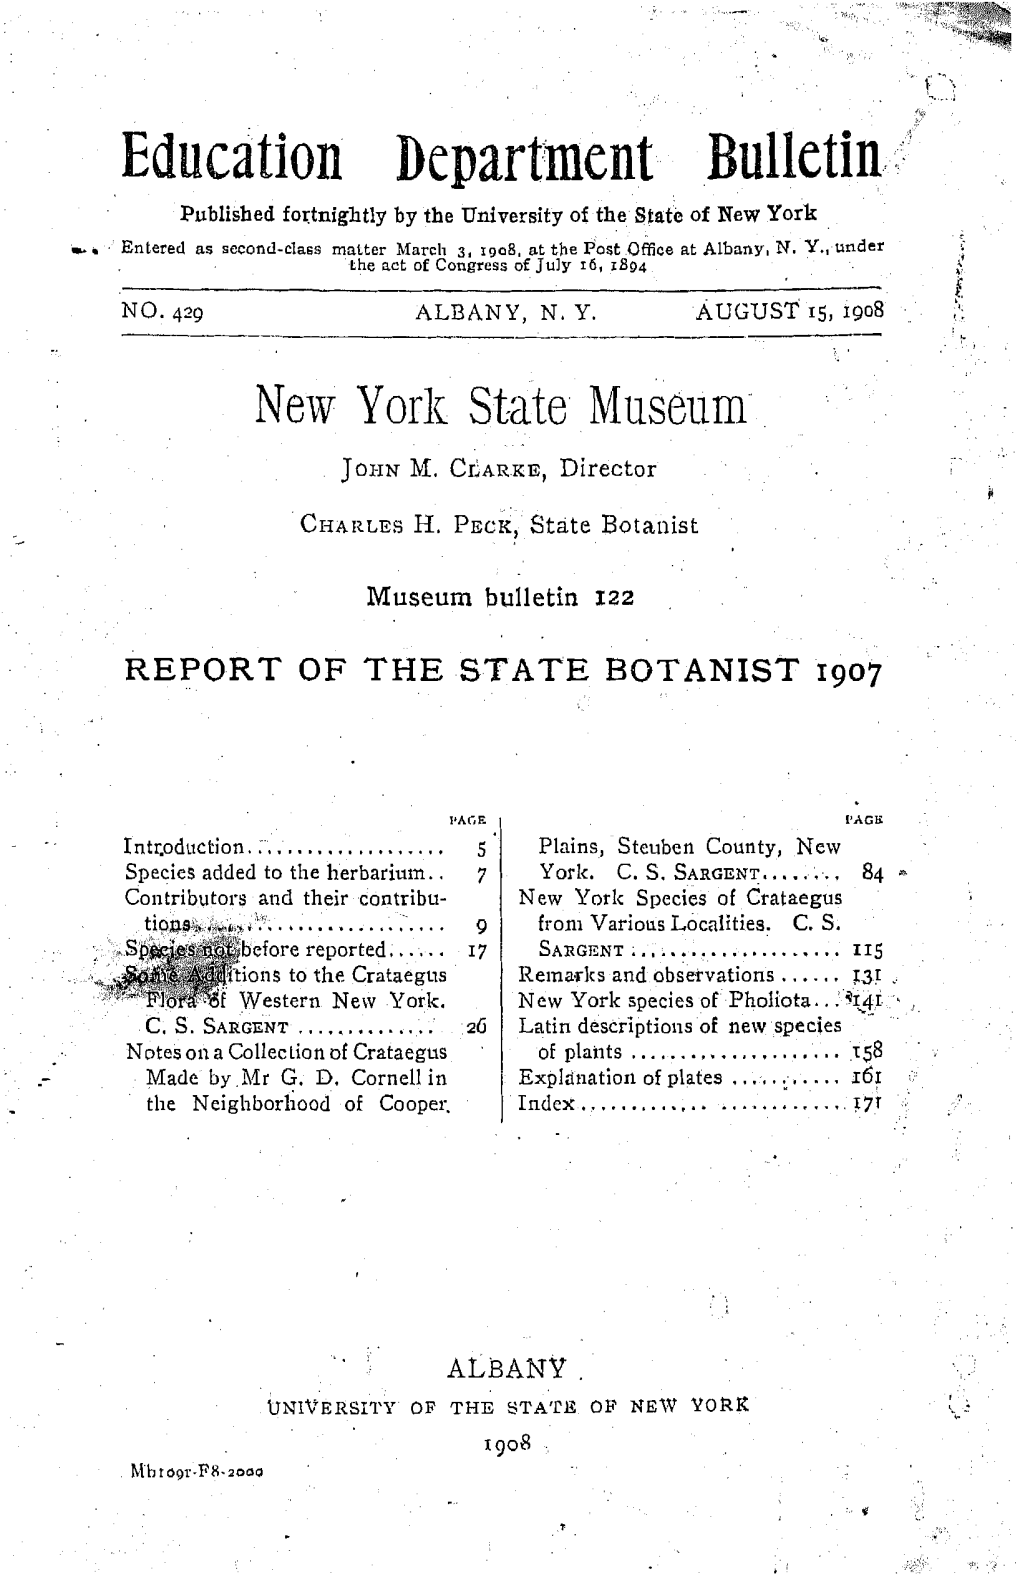 Report of the State Botanist 1907